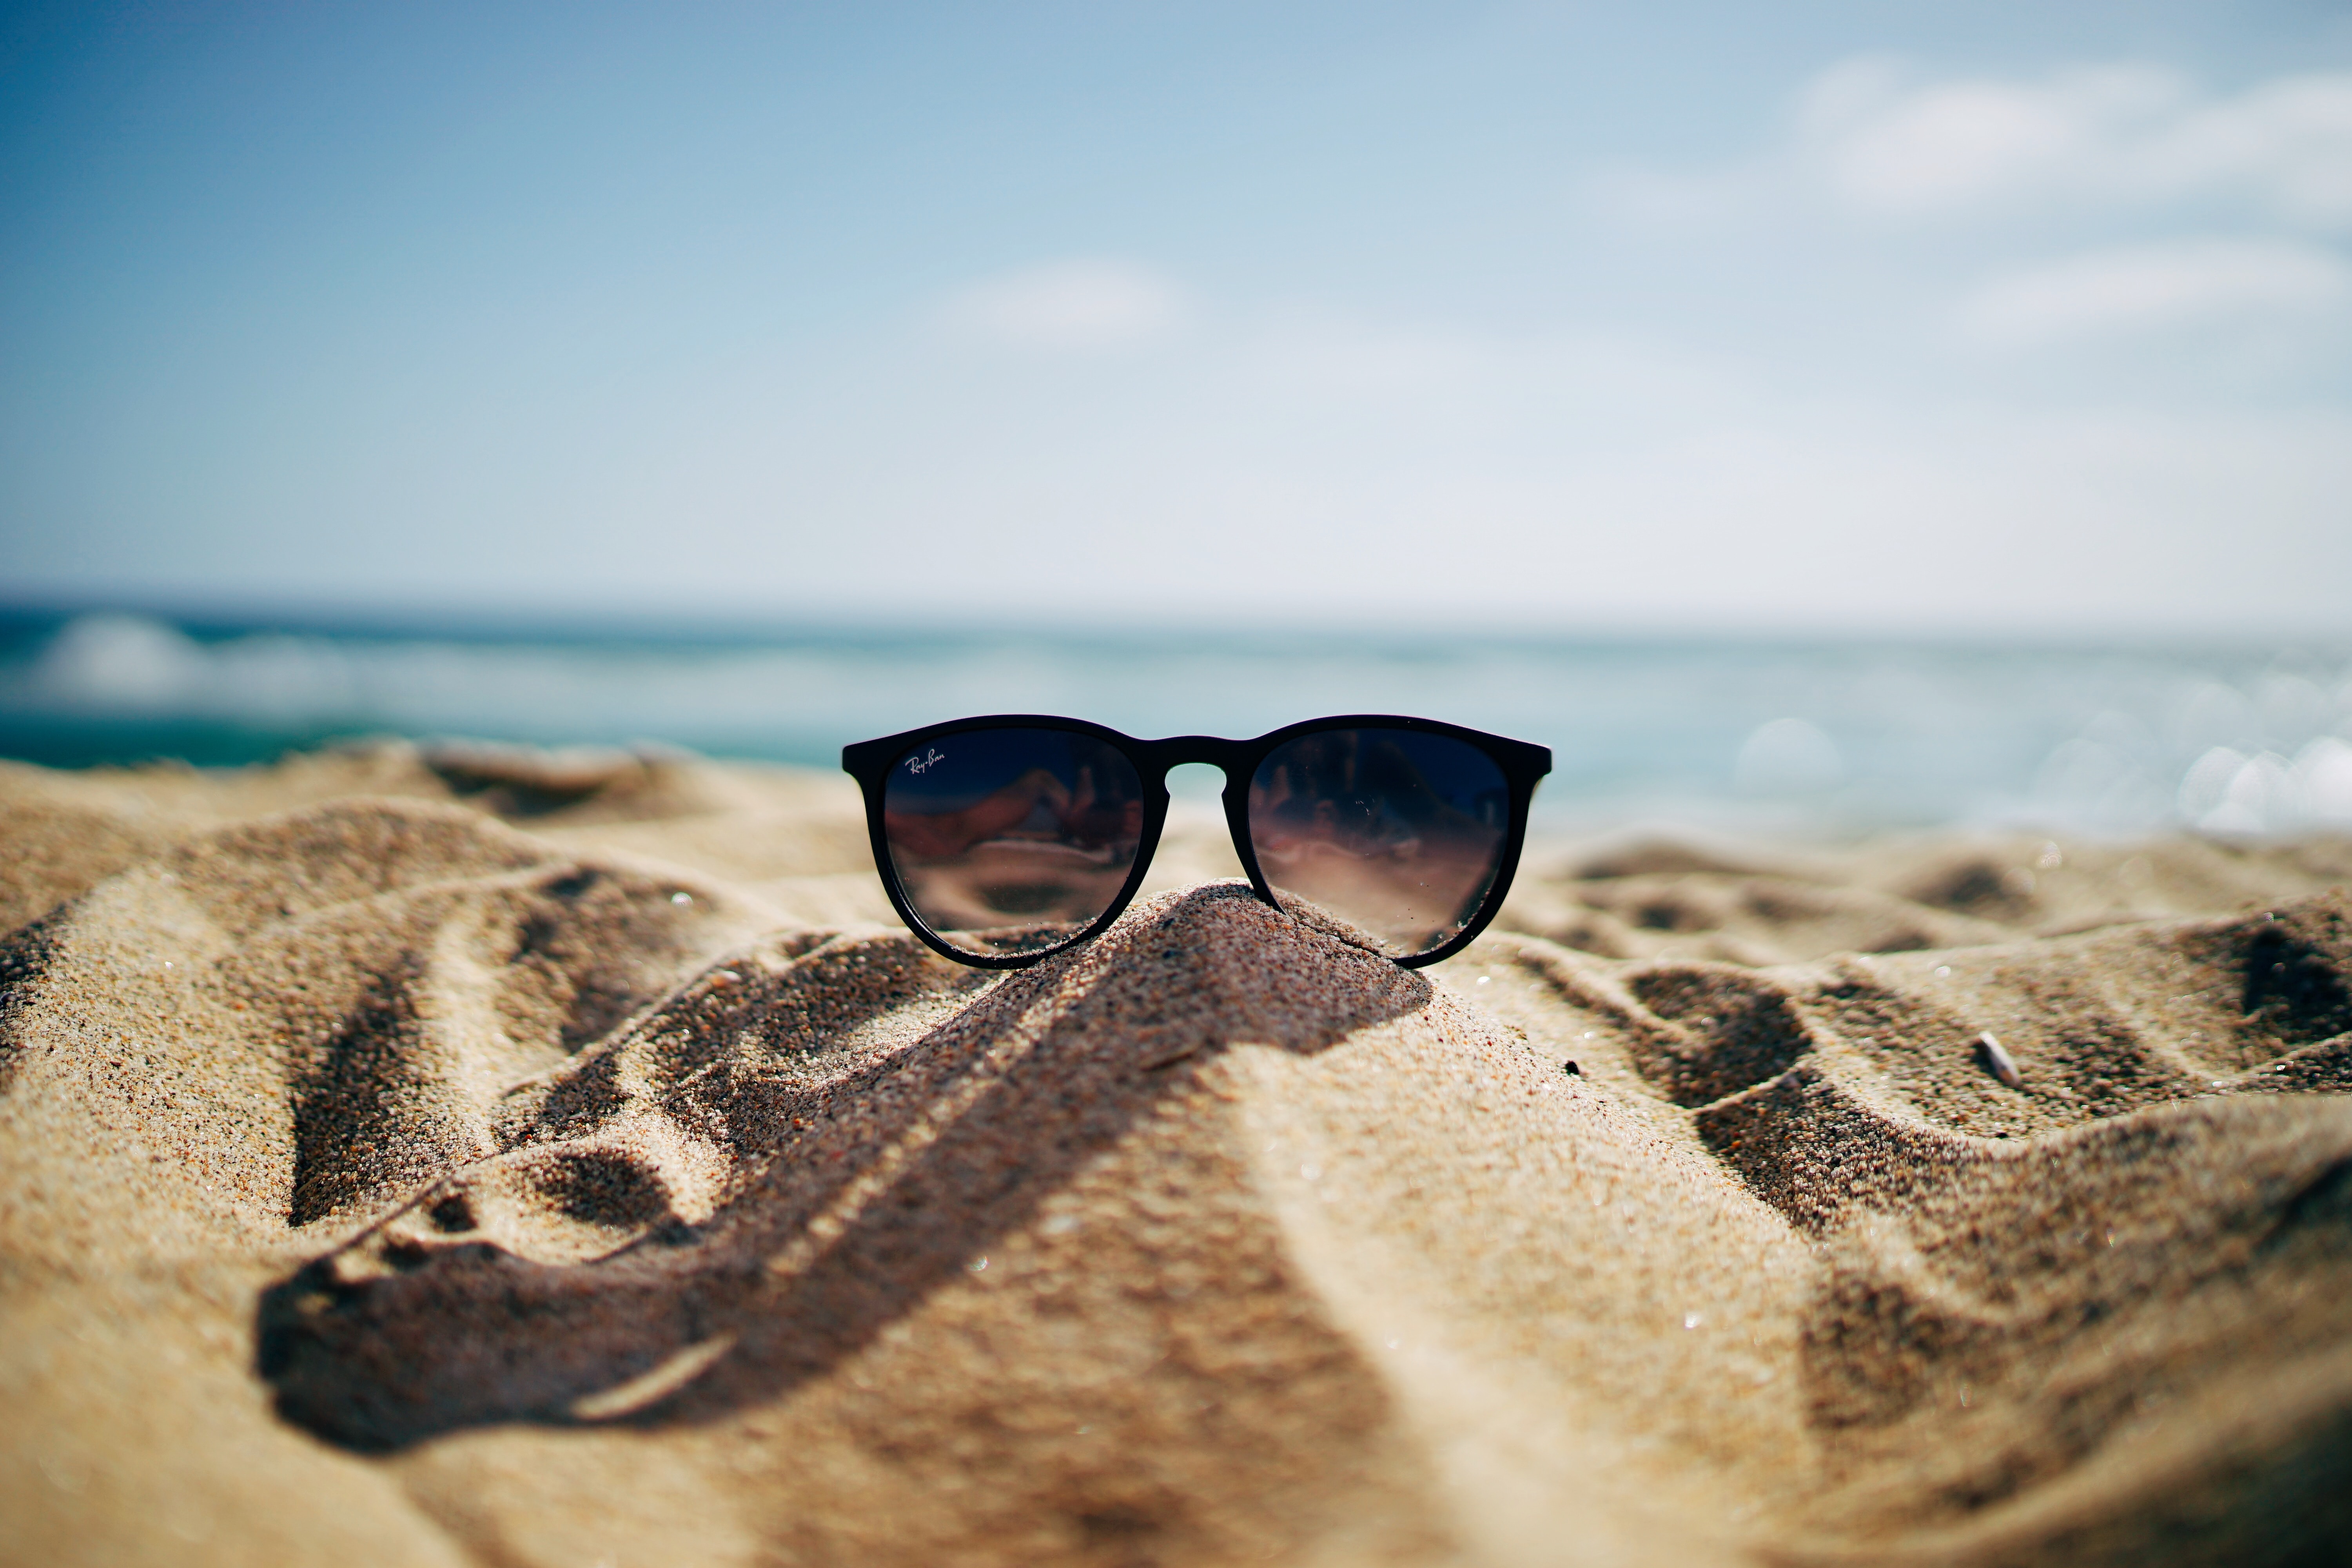 Sunglasses resting on a beach representing vacation